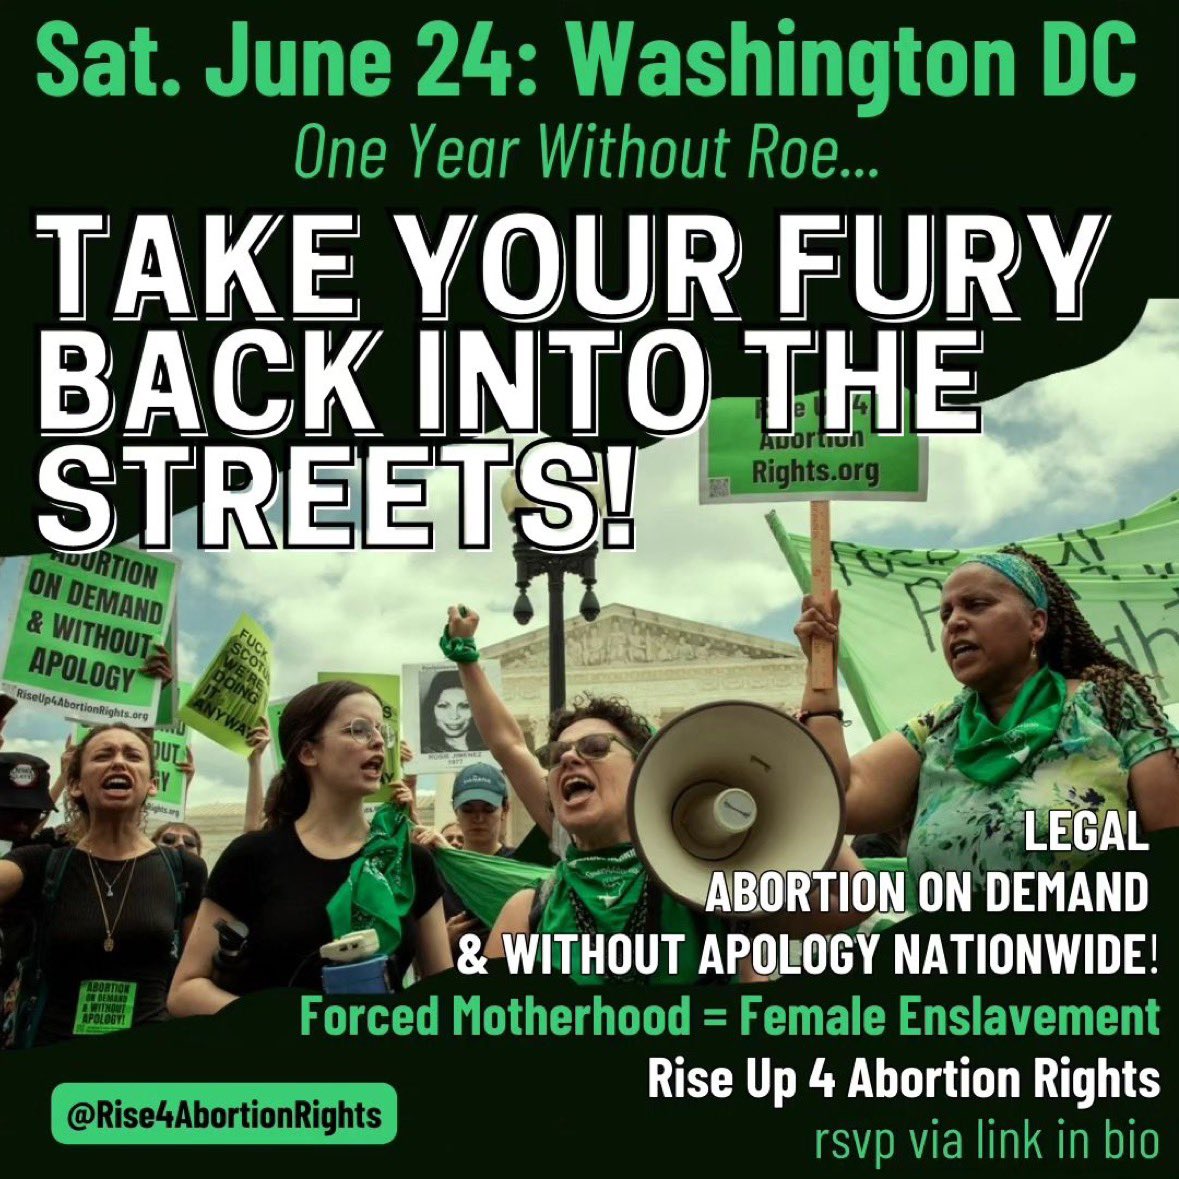 Sat, June 24
One Year Without Roe...
TAKE YOUR FURY BACK INTO THE STREETS!

Join us in D.C. to demand
LEGAL ABORTION ON DEMAND & WITHOUT APOLOGY NATIONWIDE & EVERYWHERE!

FORCED MOTHERHOOD = FEMALE ENSLAVEMENT
#RiseUp4AbortionRights

Sign up to join ⬇️

actionnetwork.org/events/one-yea…